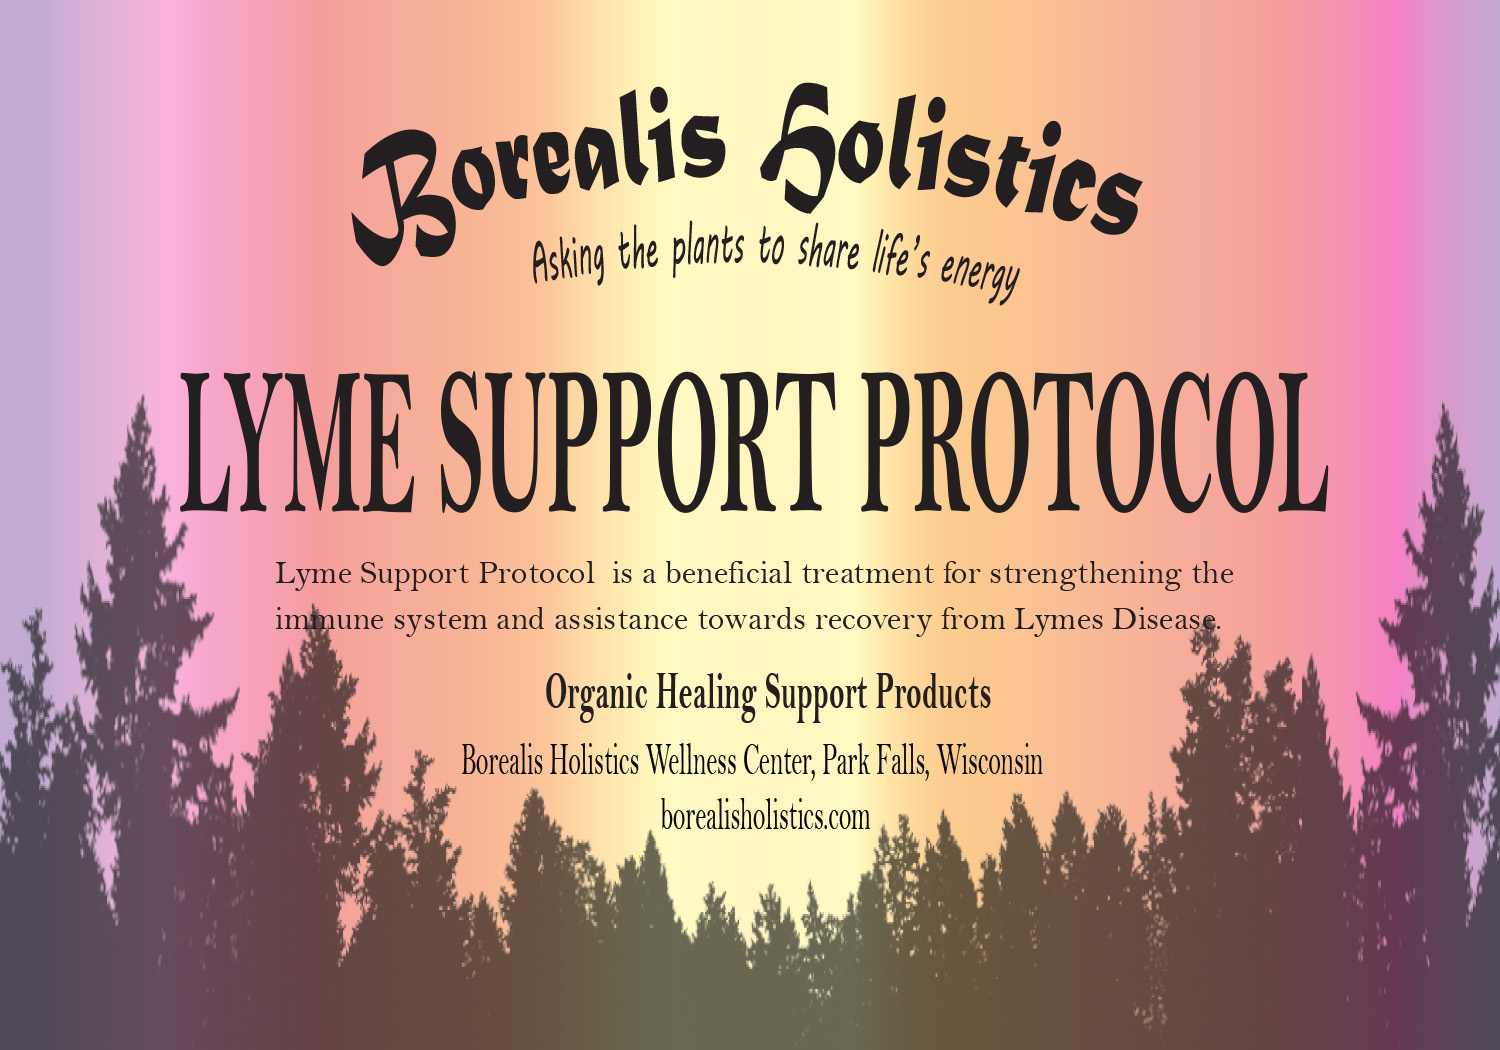 Lyme Support Protocol